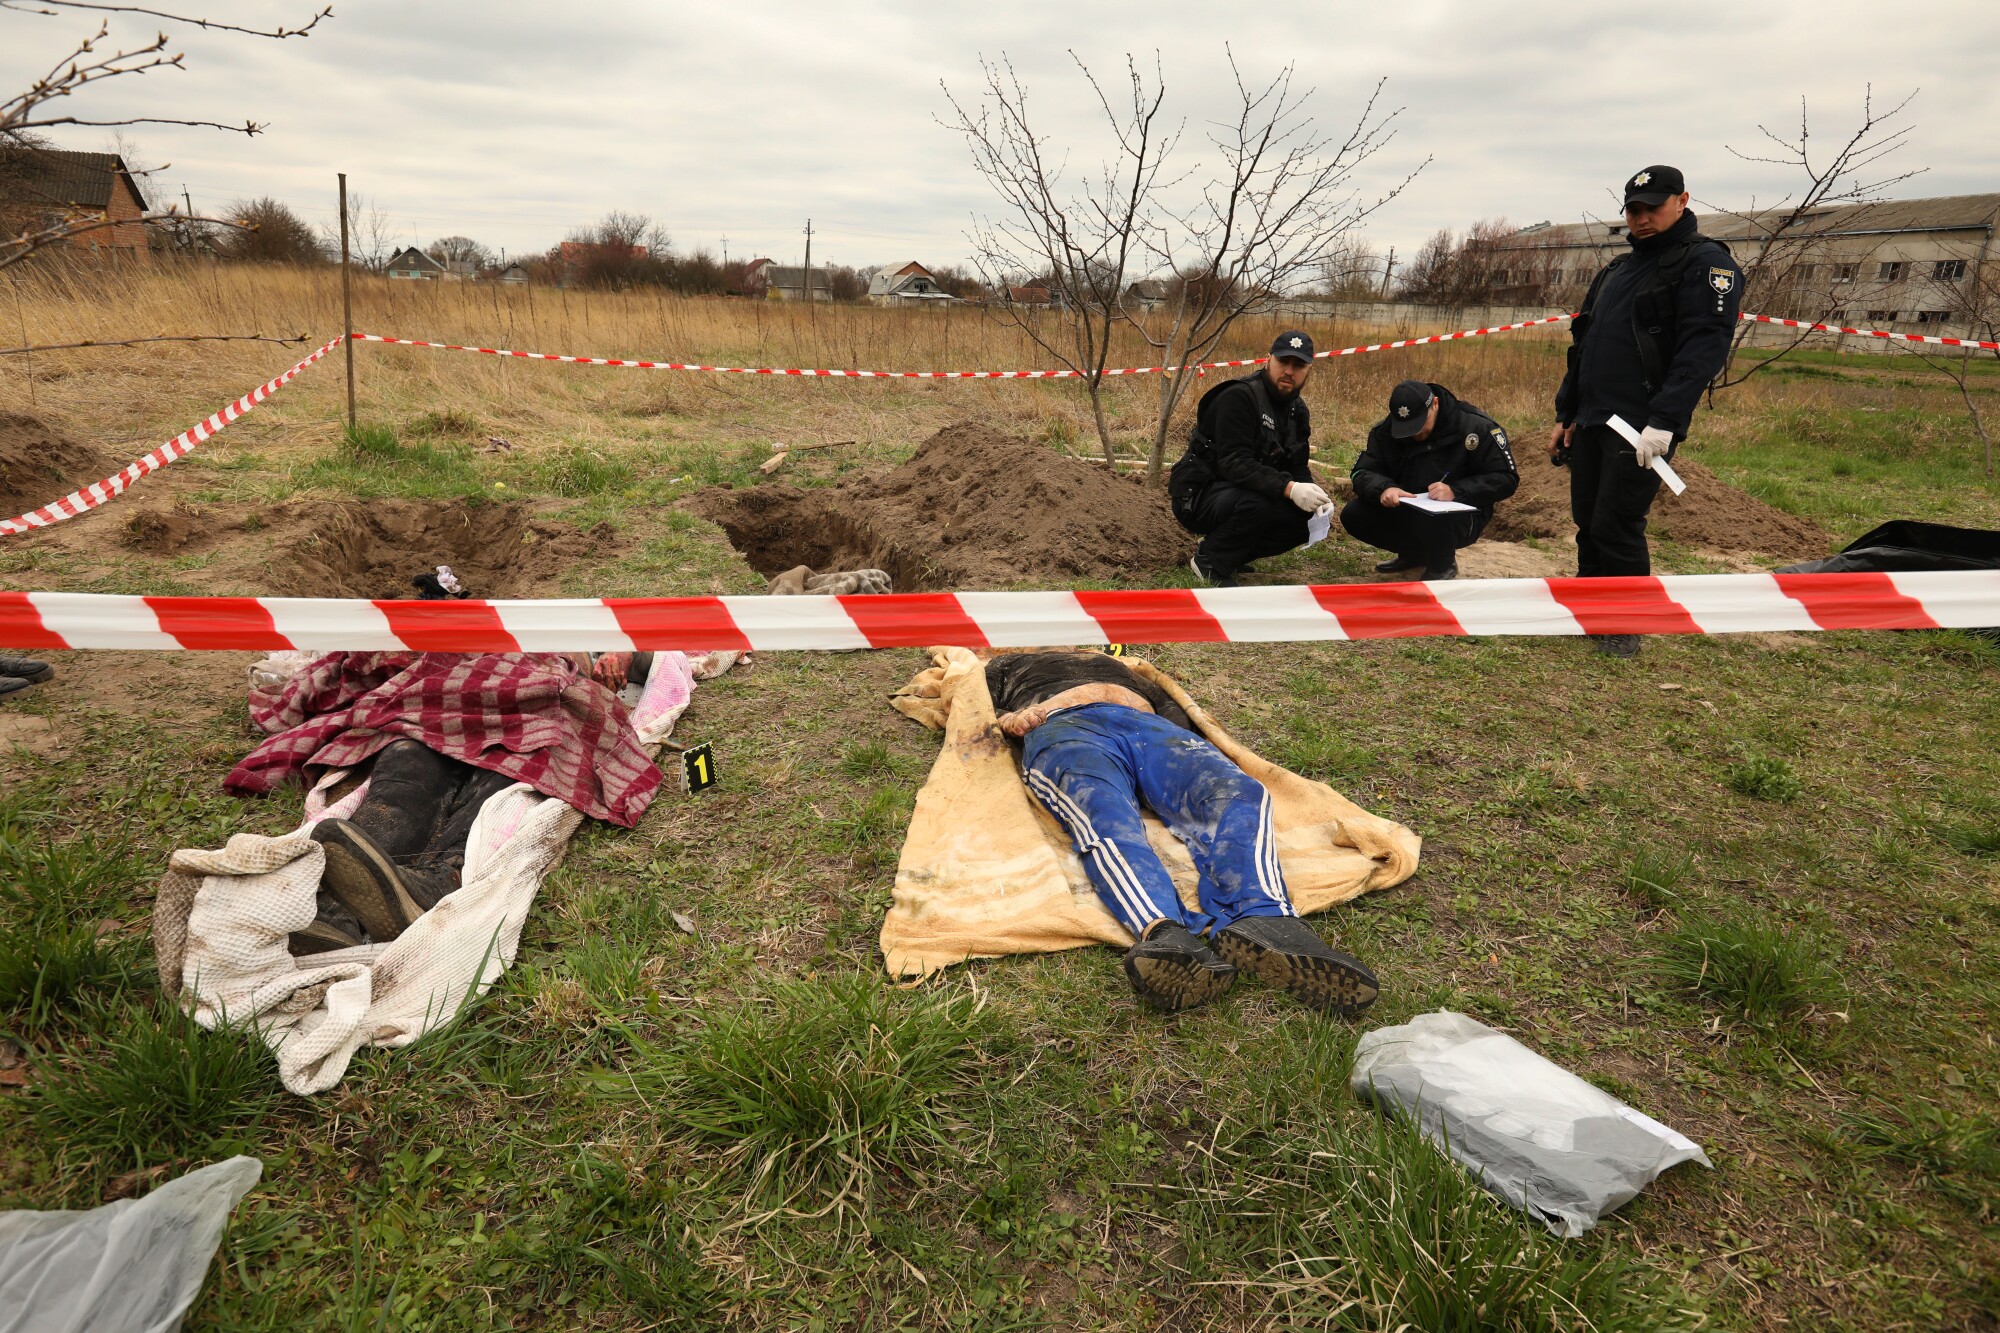 Bodies exhumed from a mass grave lie on the ground as investigators work in the town of Borodianka, Ukraine.